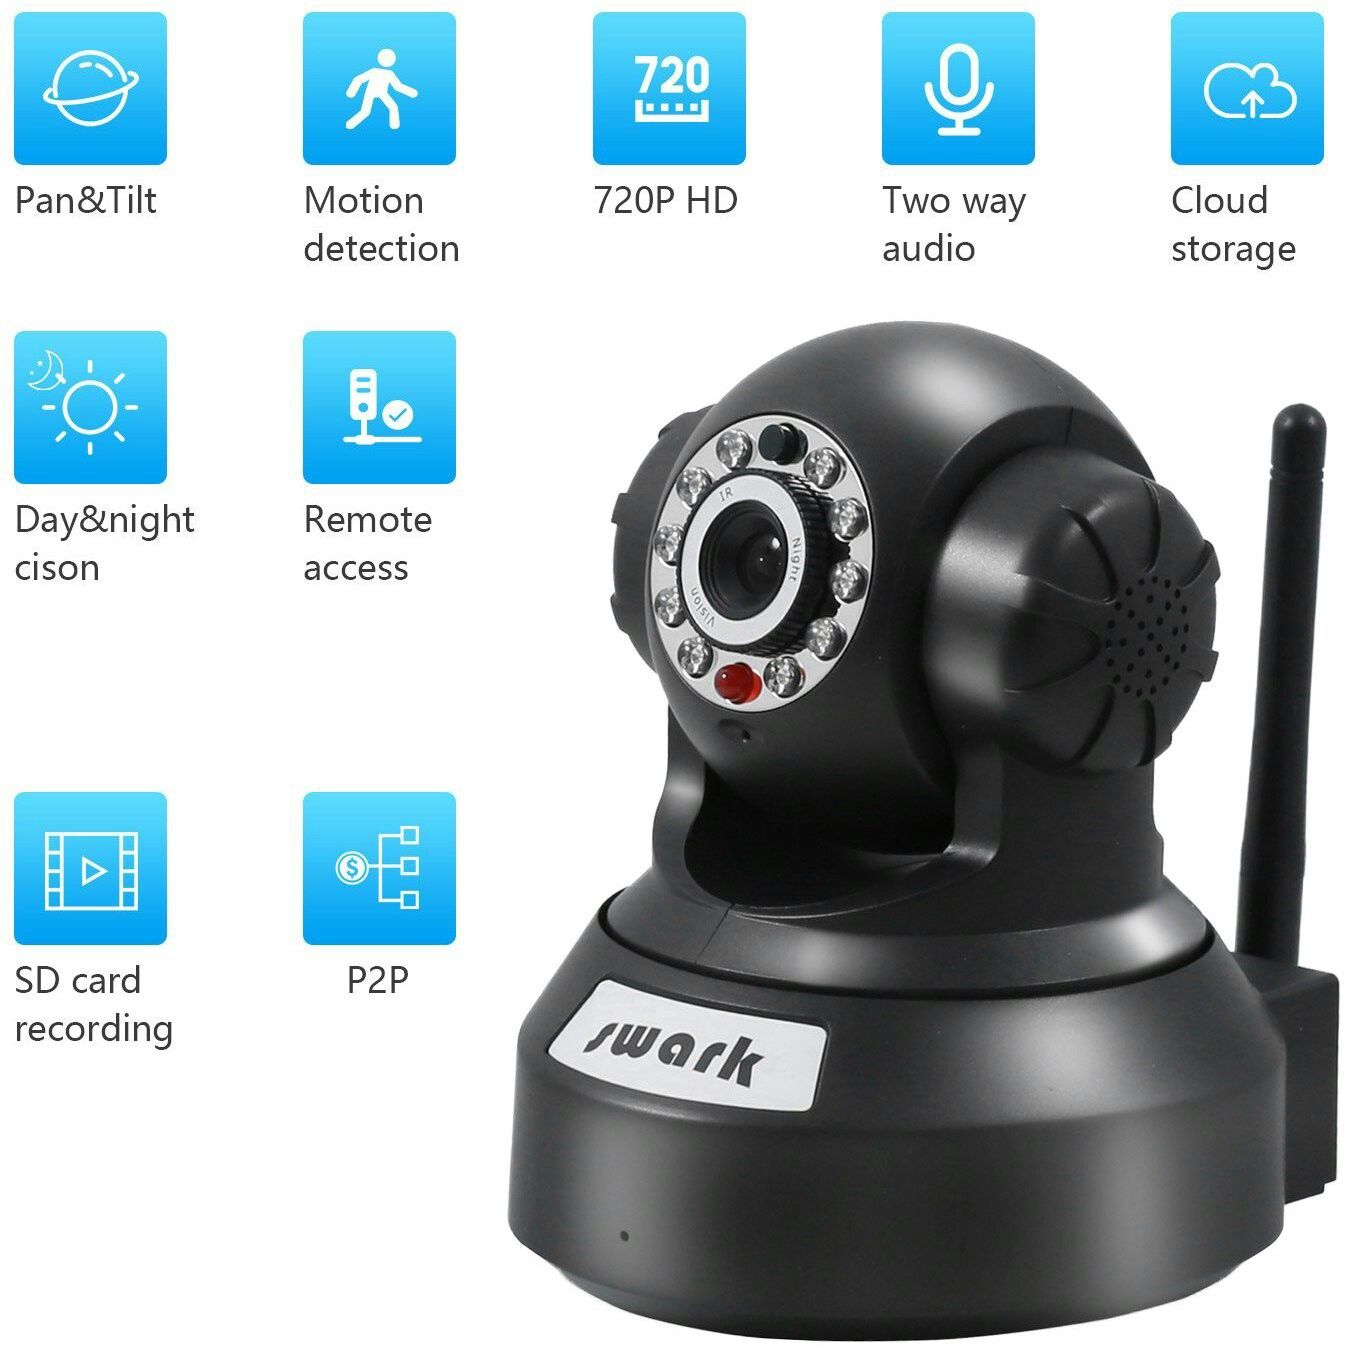 New wifi IP camera night vision motion detection